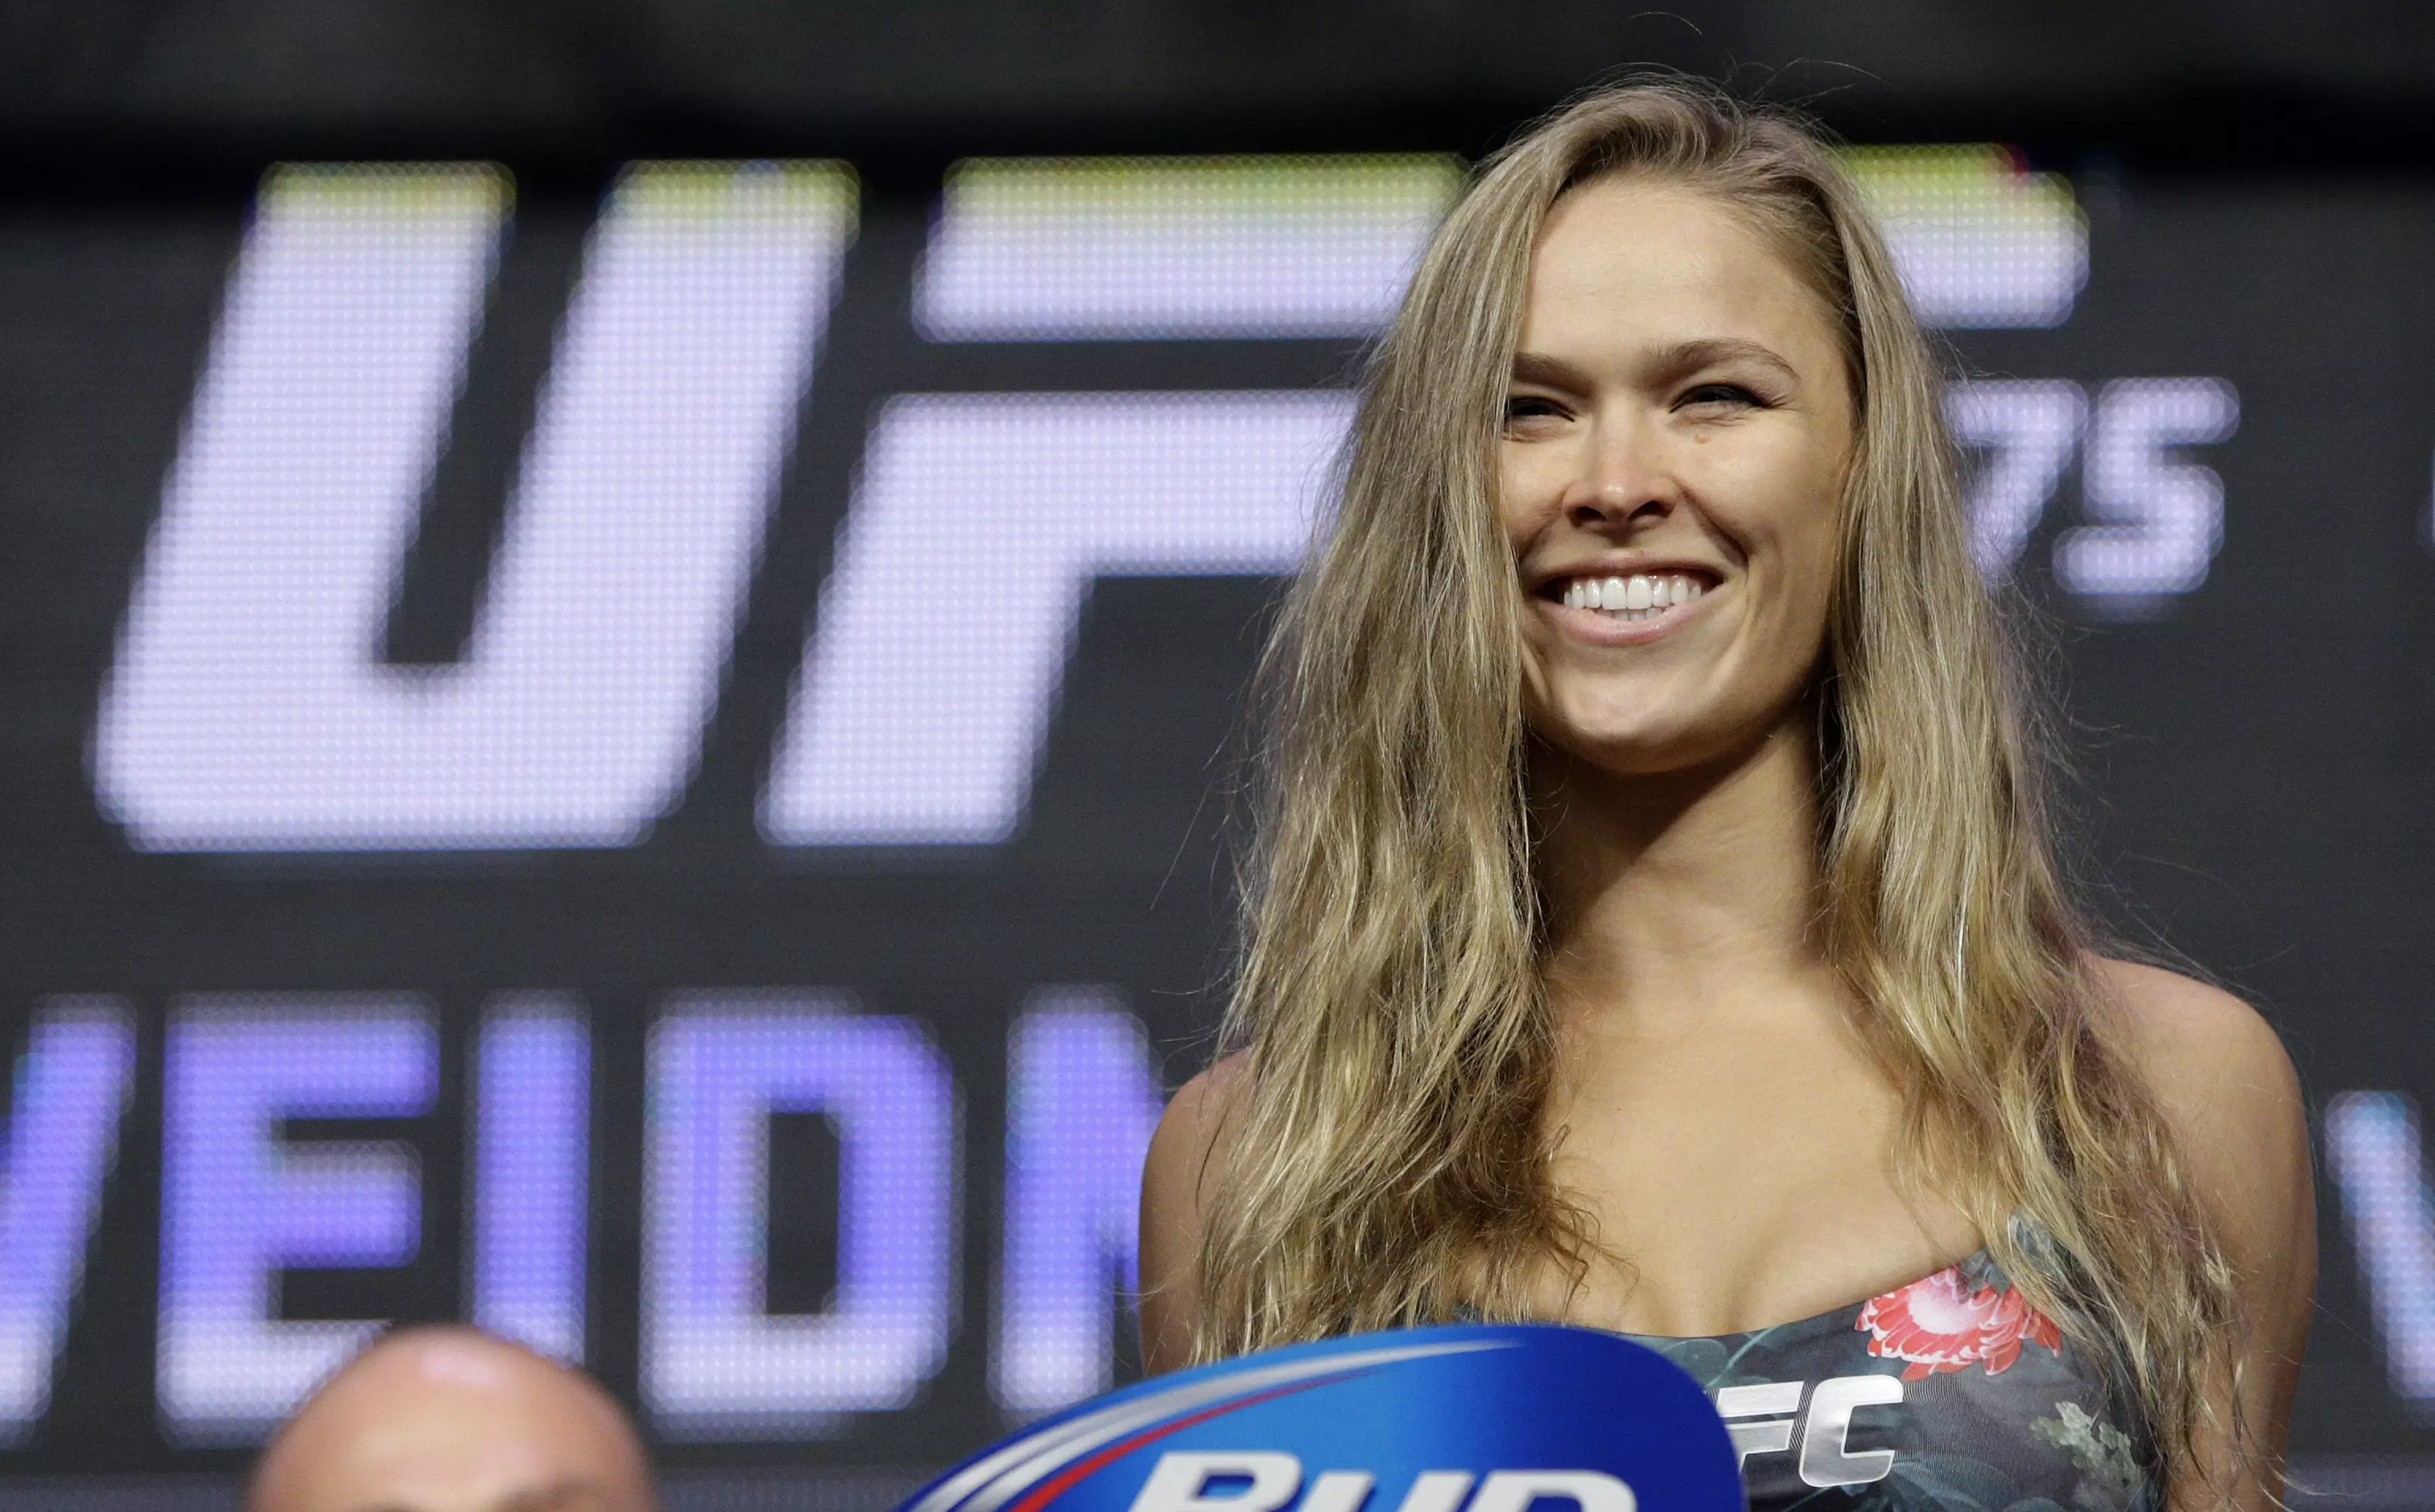 UFC President Dana White Expects Ronda Rousey To Fight This Year